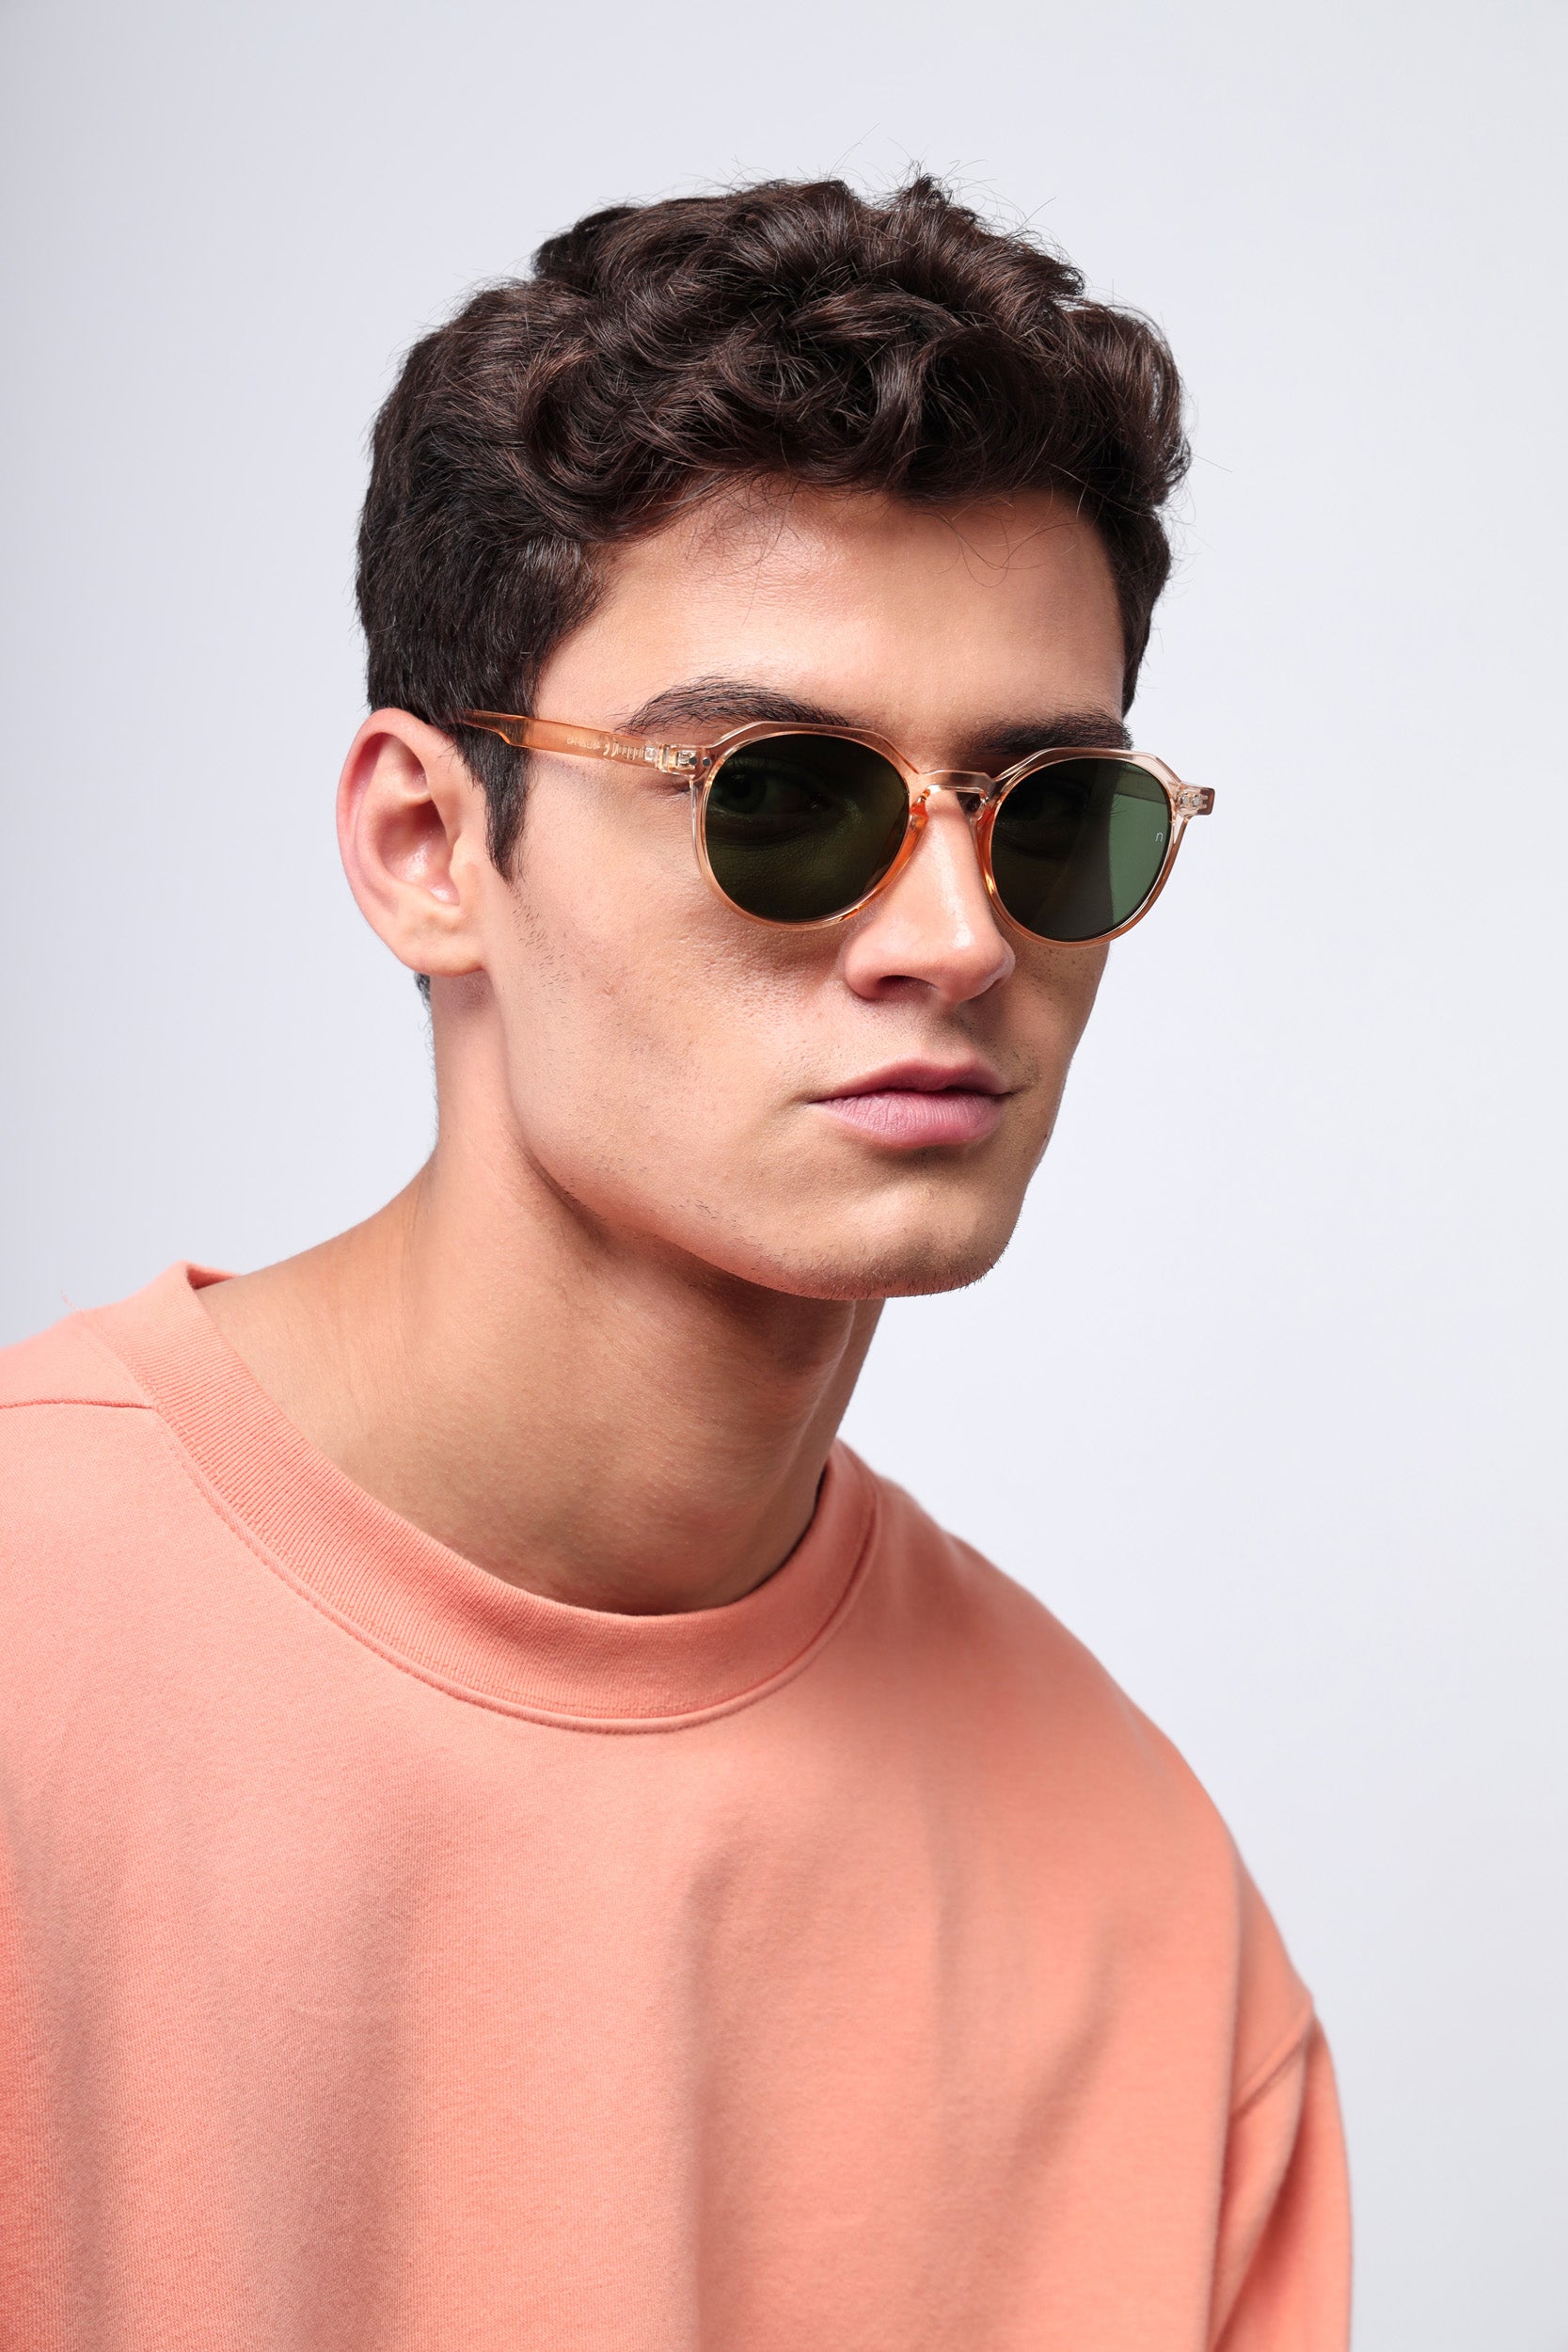 Discover 261+ dad sunglasses best